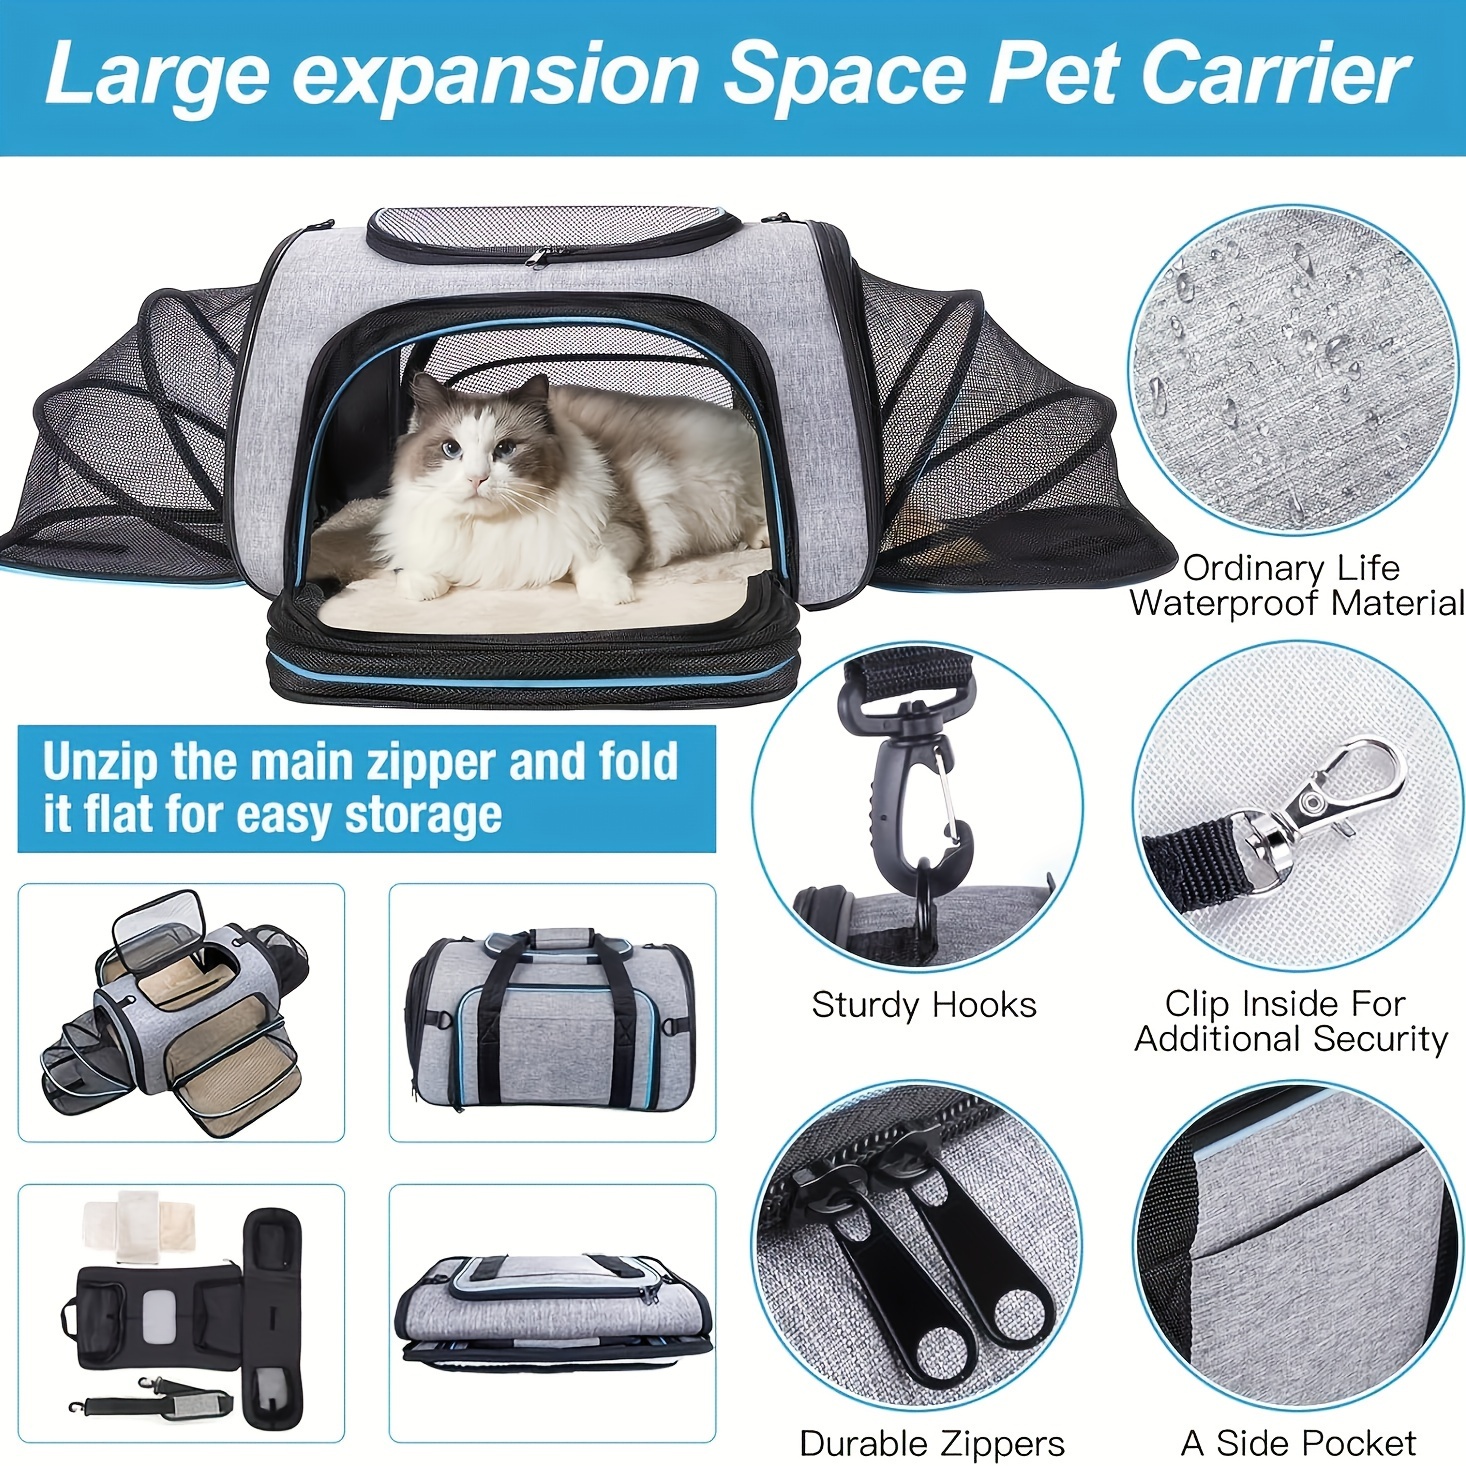 

4-way Expandable Pet Carrier, Airline Approved Foldable Cat Soft Sided Carrier With Removable Fleece Pad For Cats, Puppies, Small Dogs (18 Inches X 11 Inches X 11 Inches)